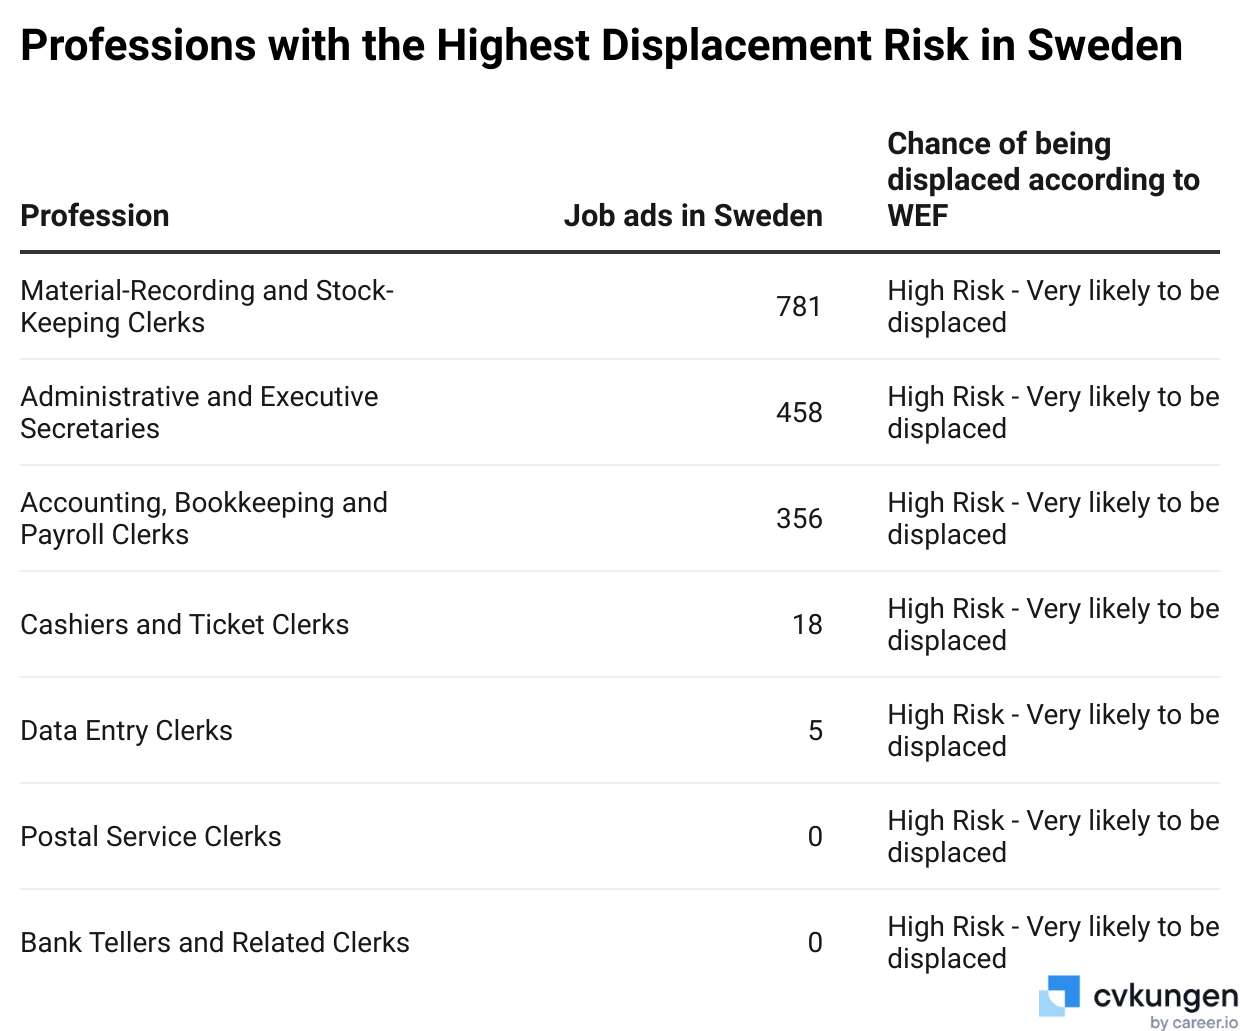 Professions with the highest displacement risk in Sweden